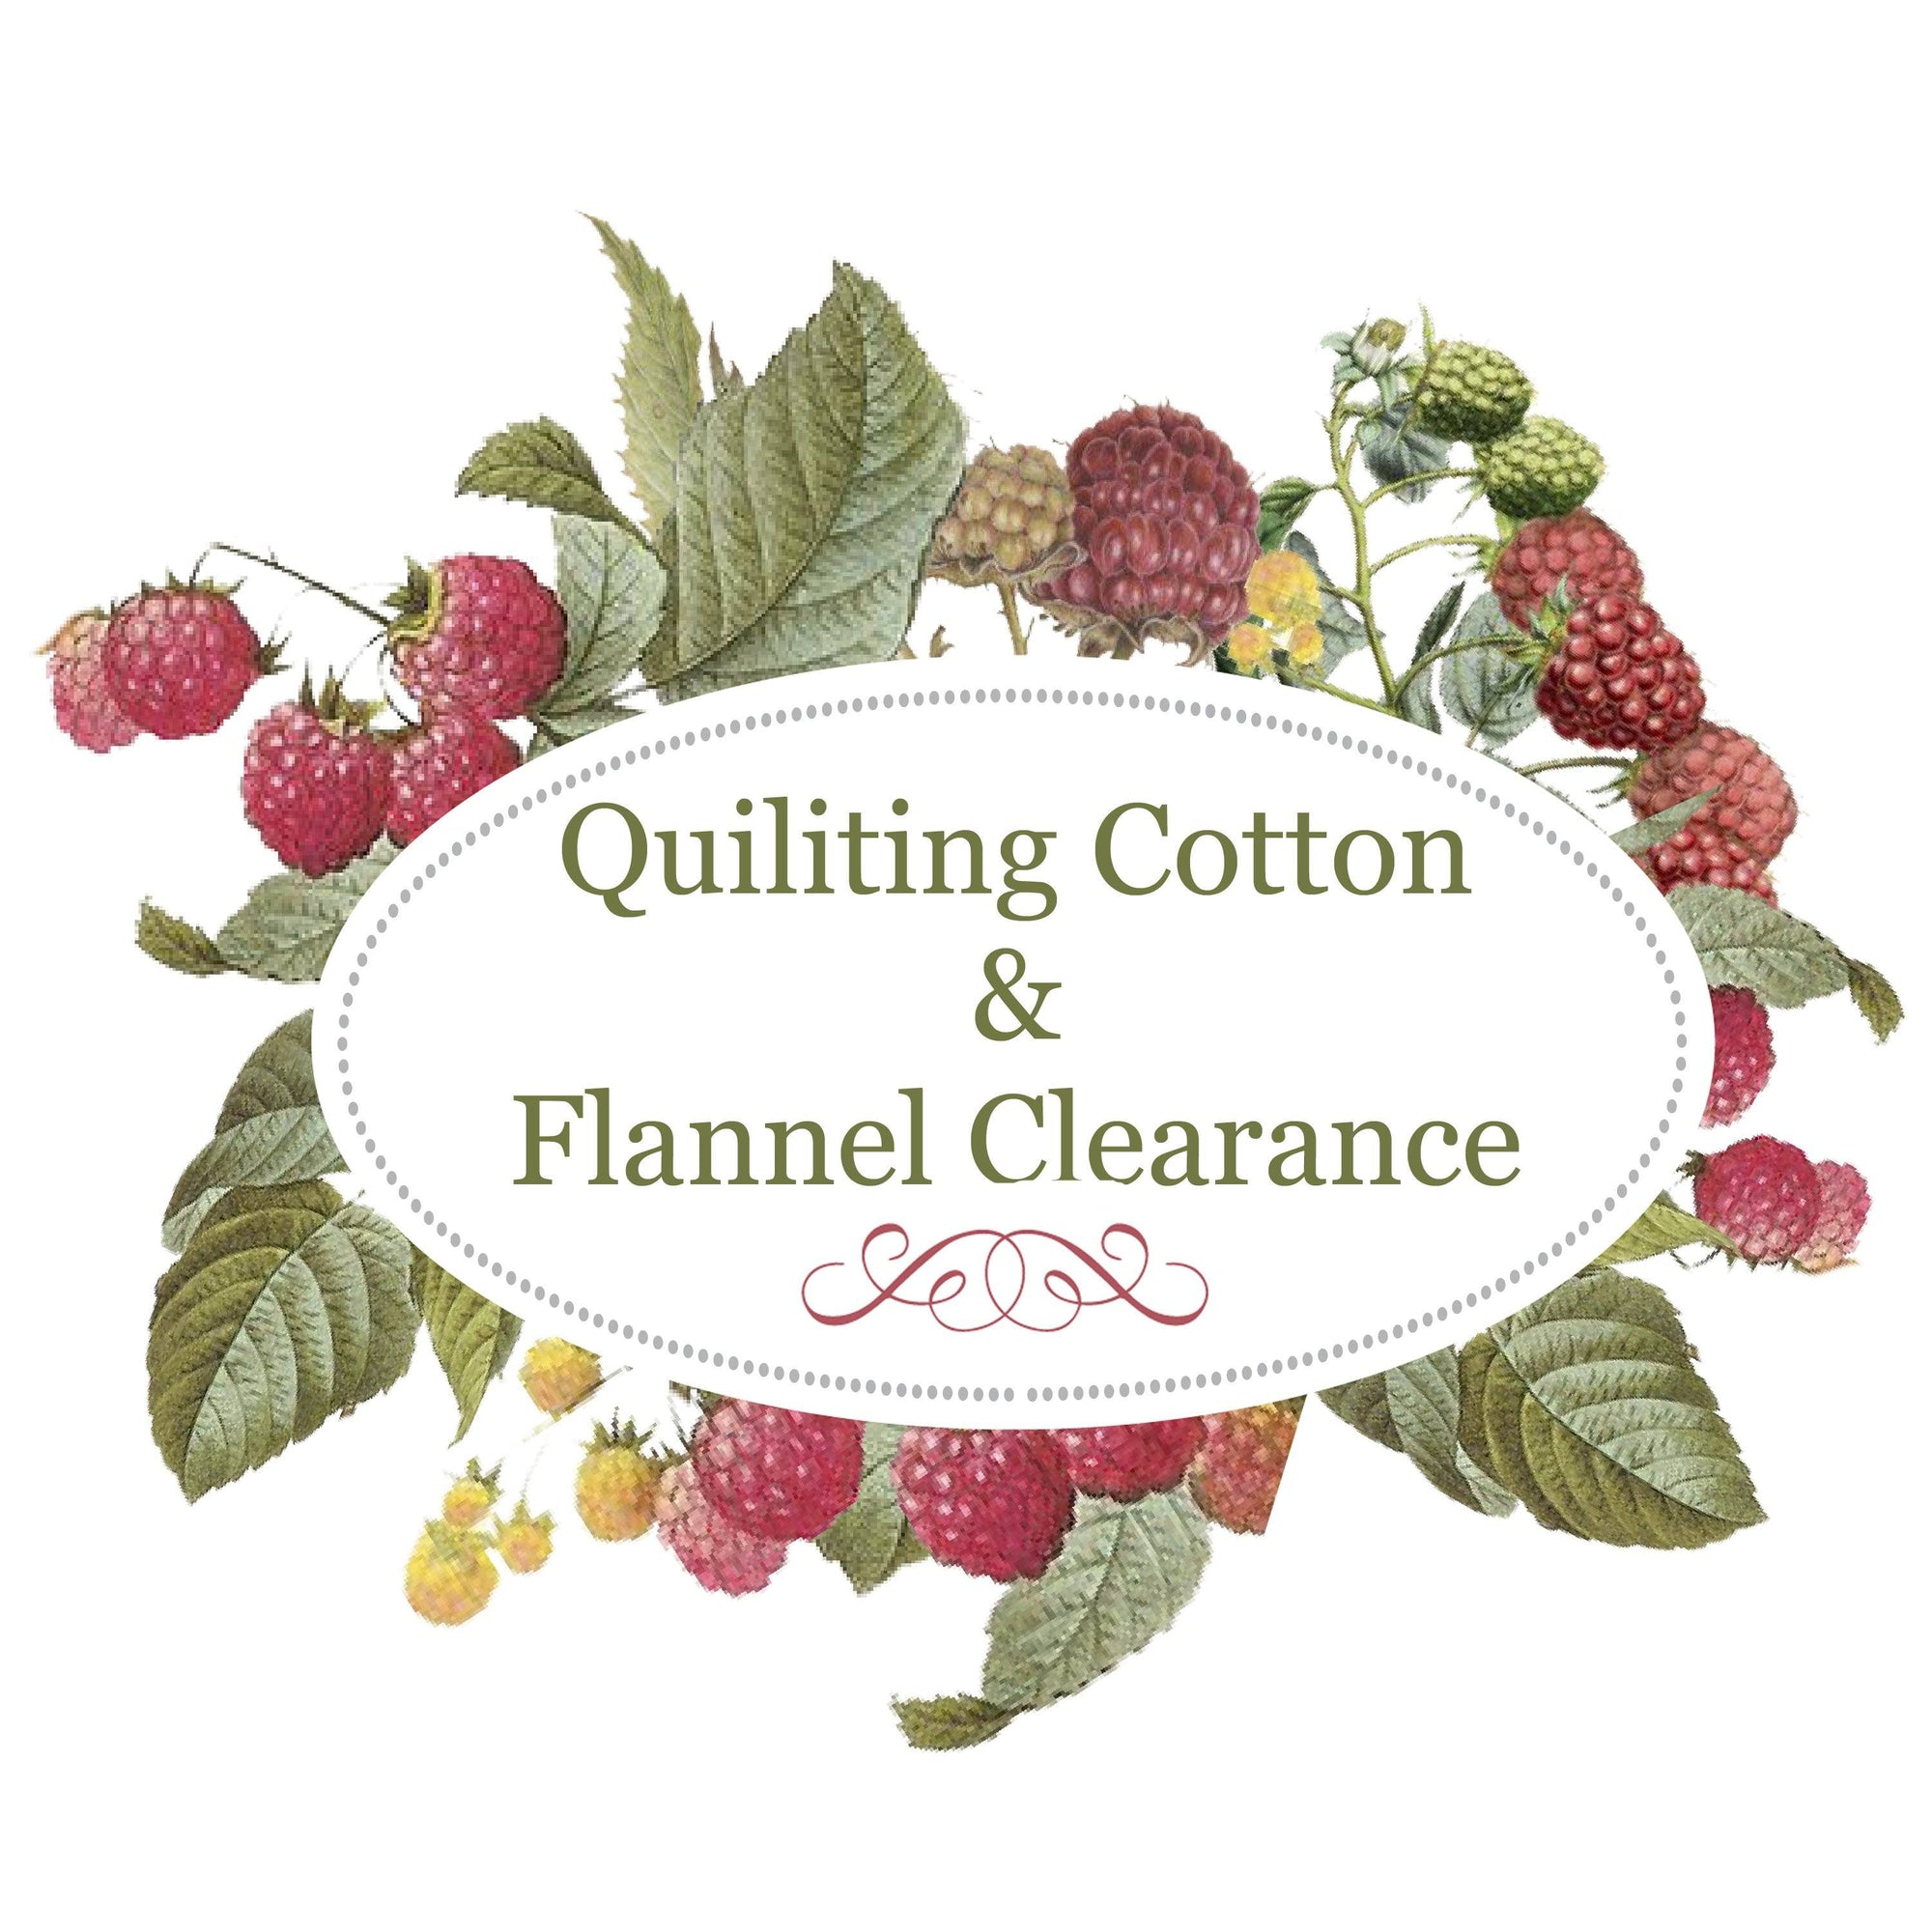 Woven Cotton And Flannel Clearance